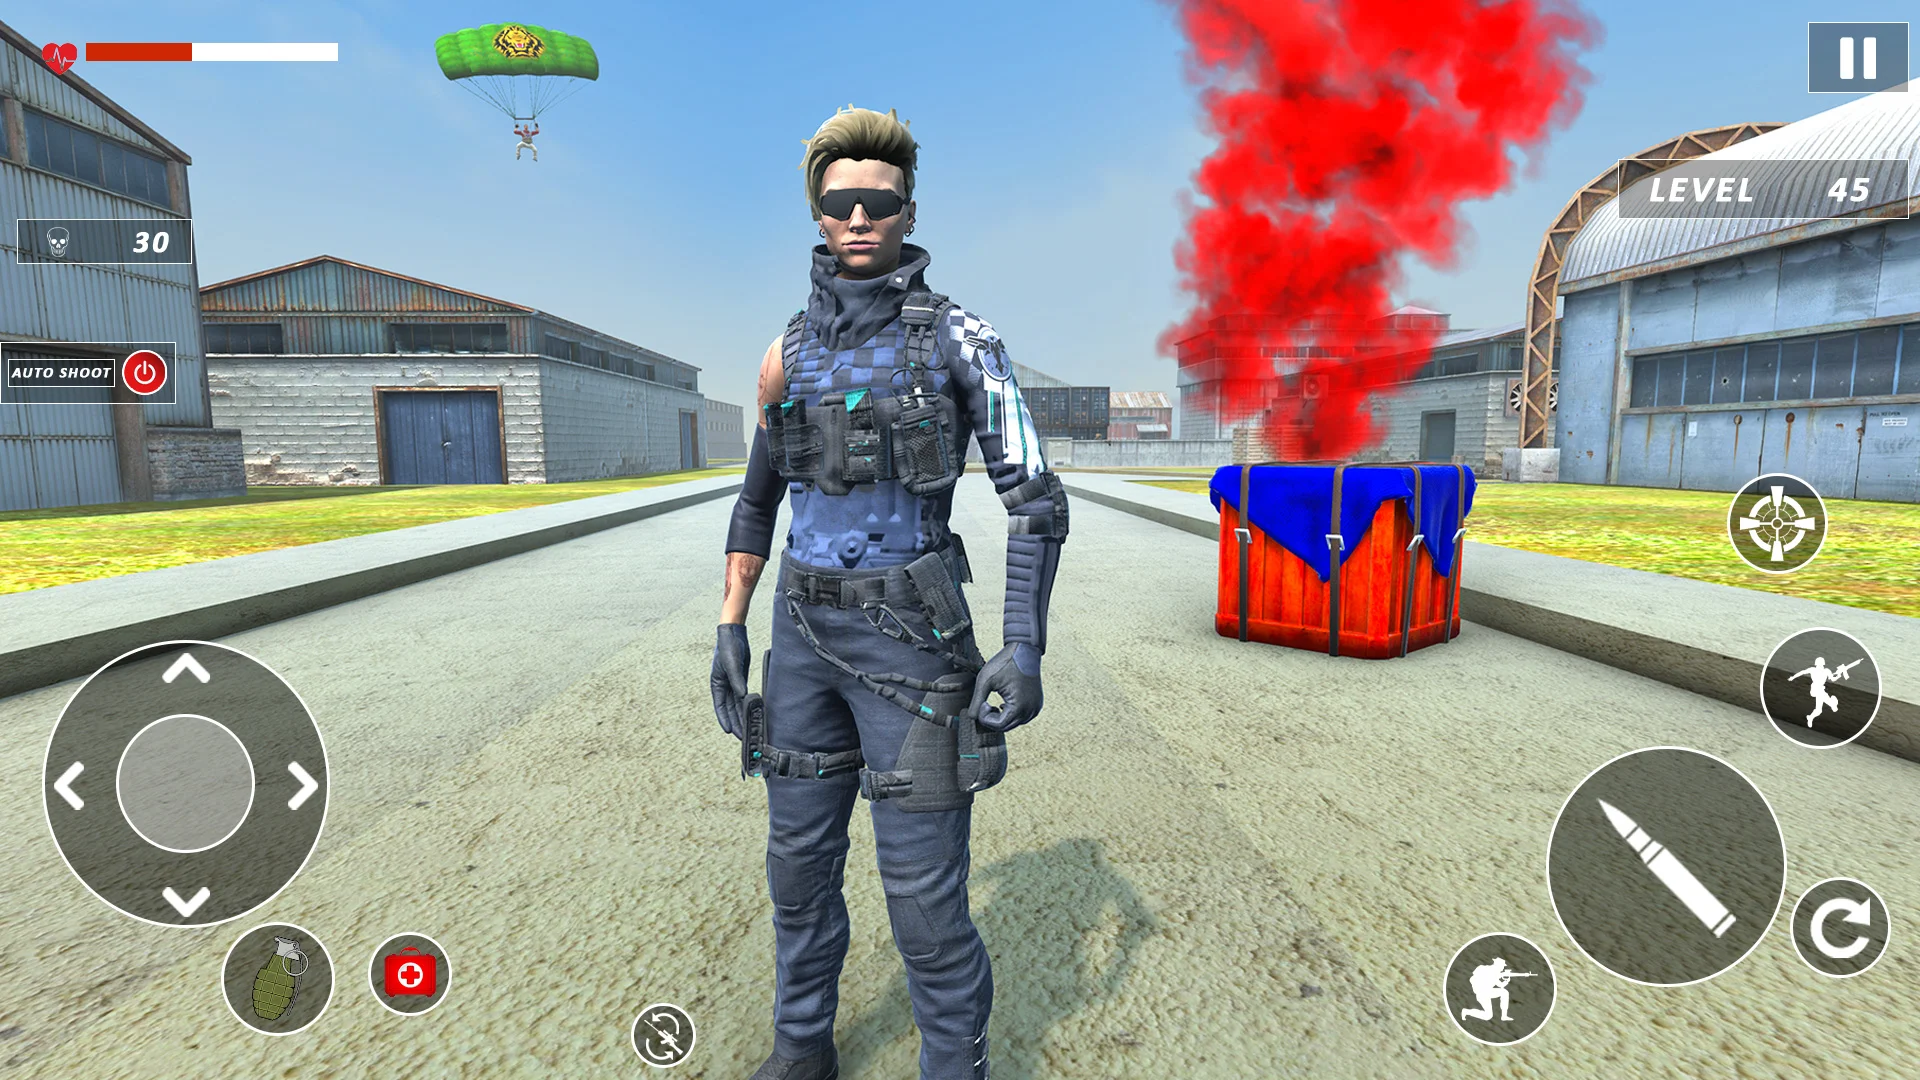 Squad Fire Gun Games Clash FF Game for Android